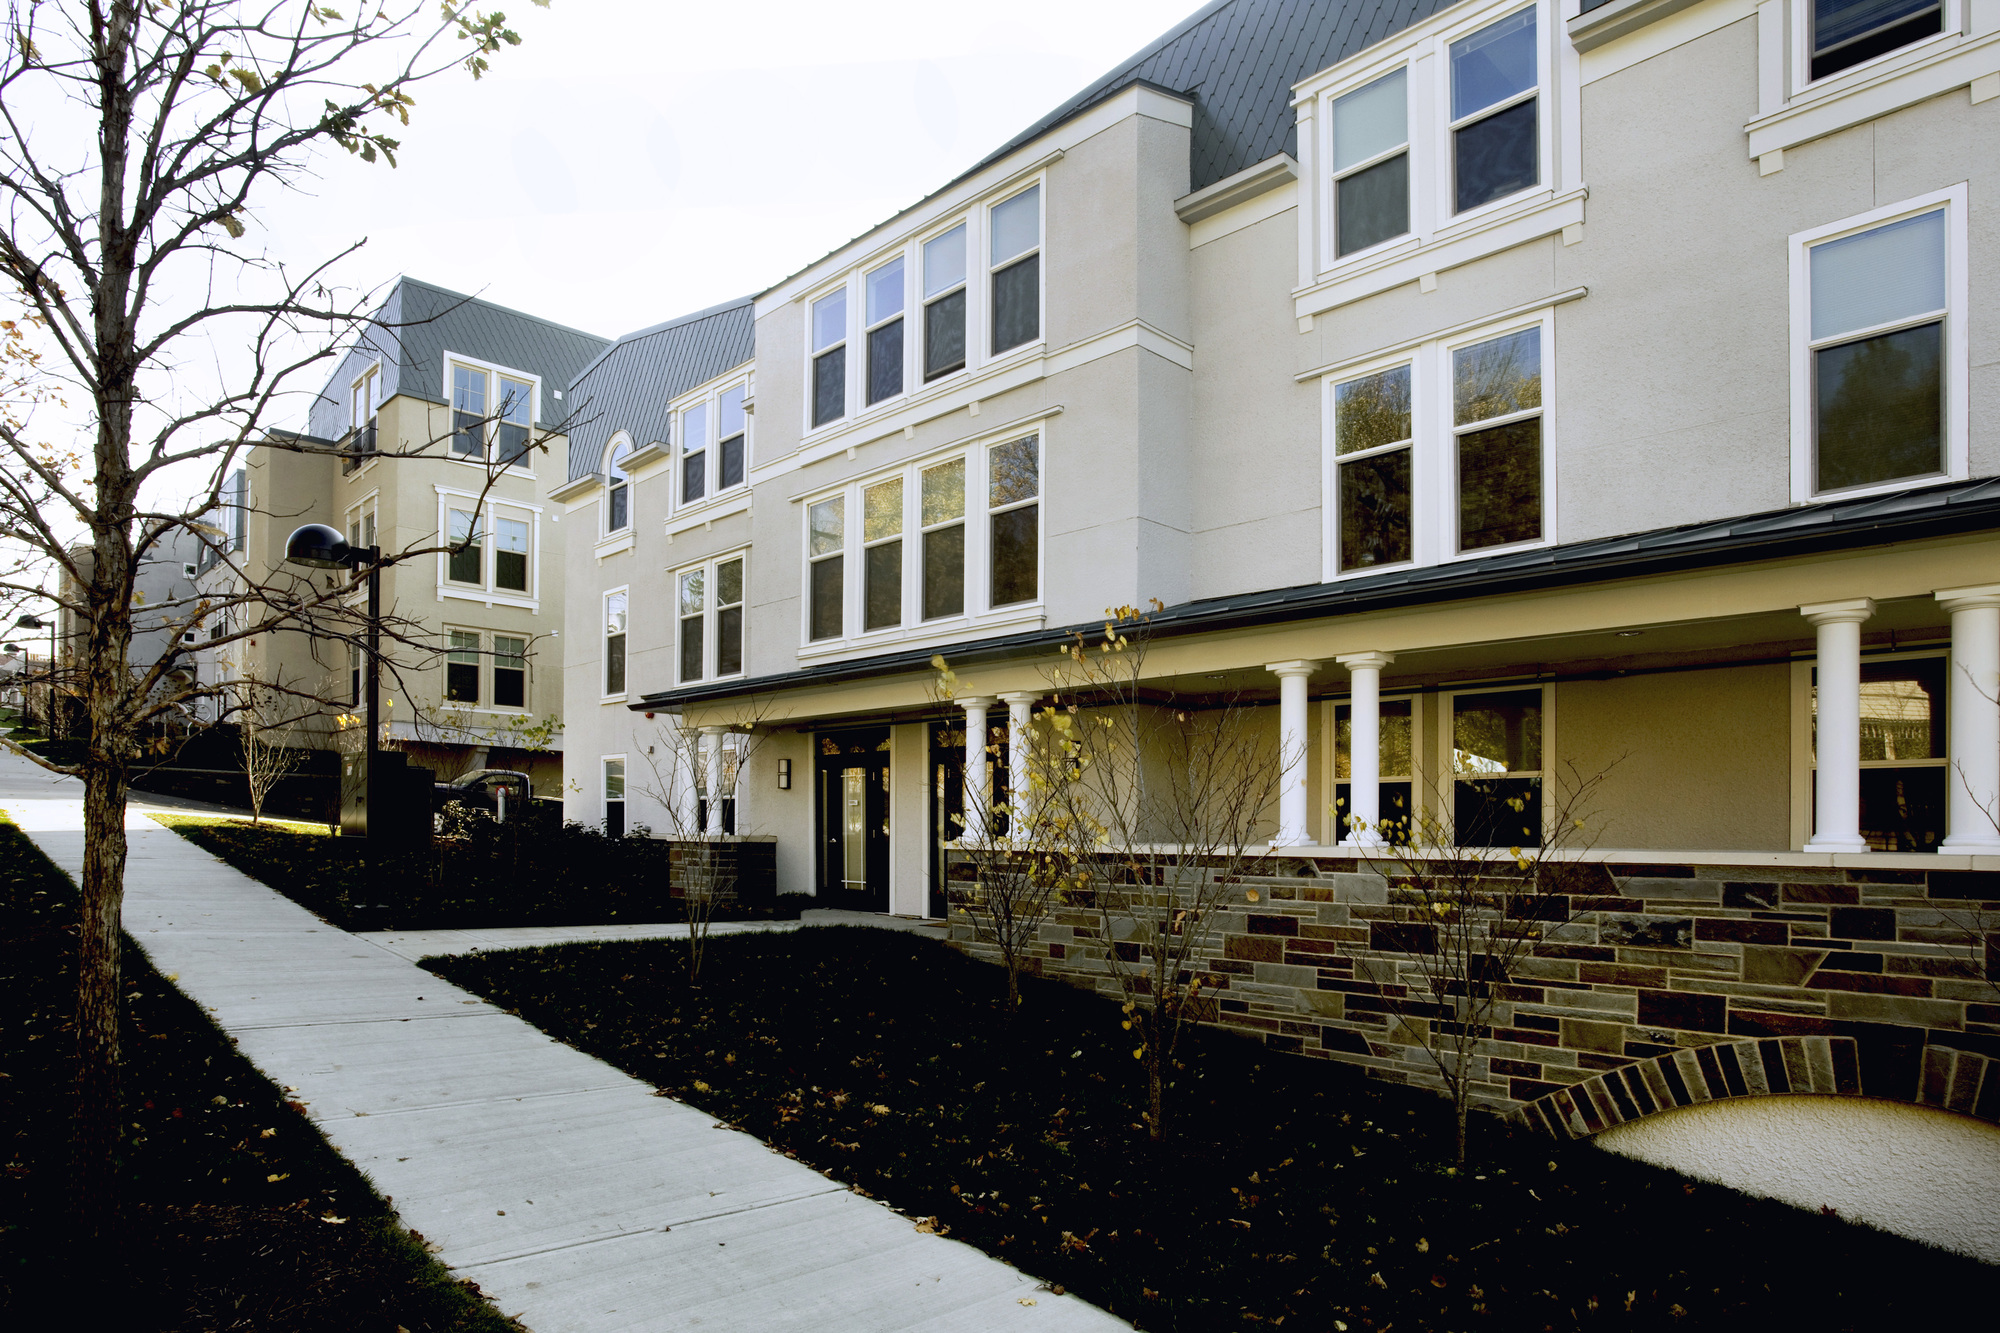  at Collegetown Terrace is convenient to Cornell University and downtown Ithaca NY.